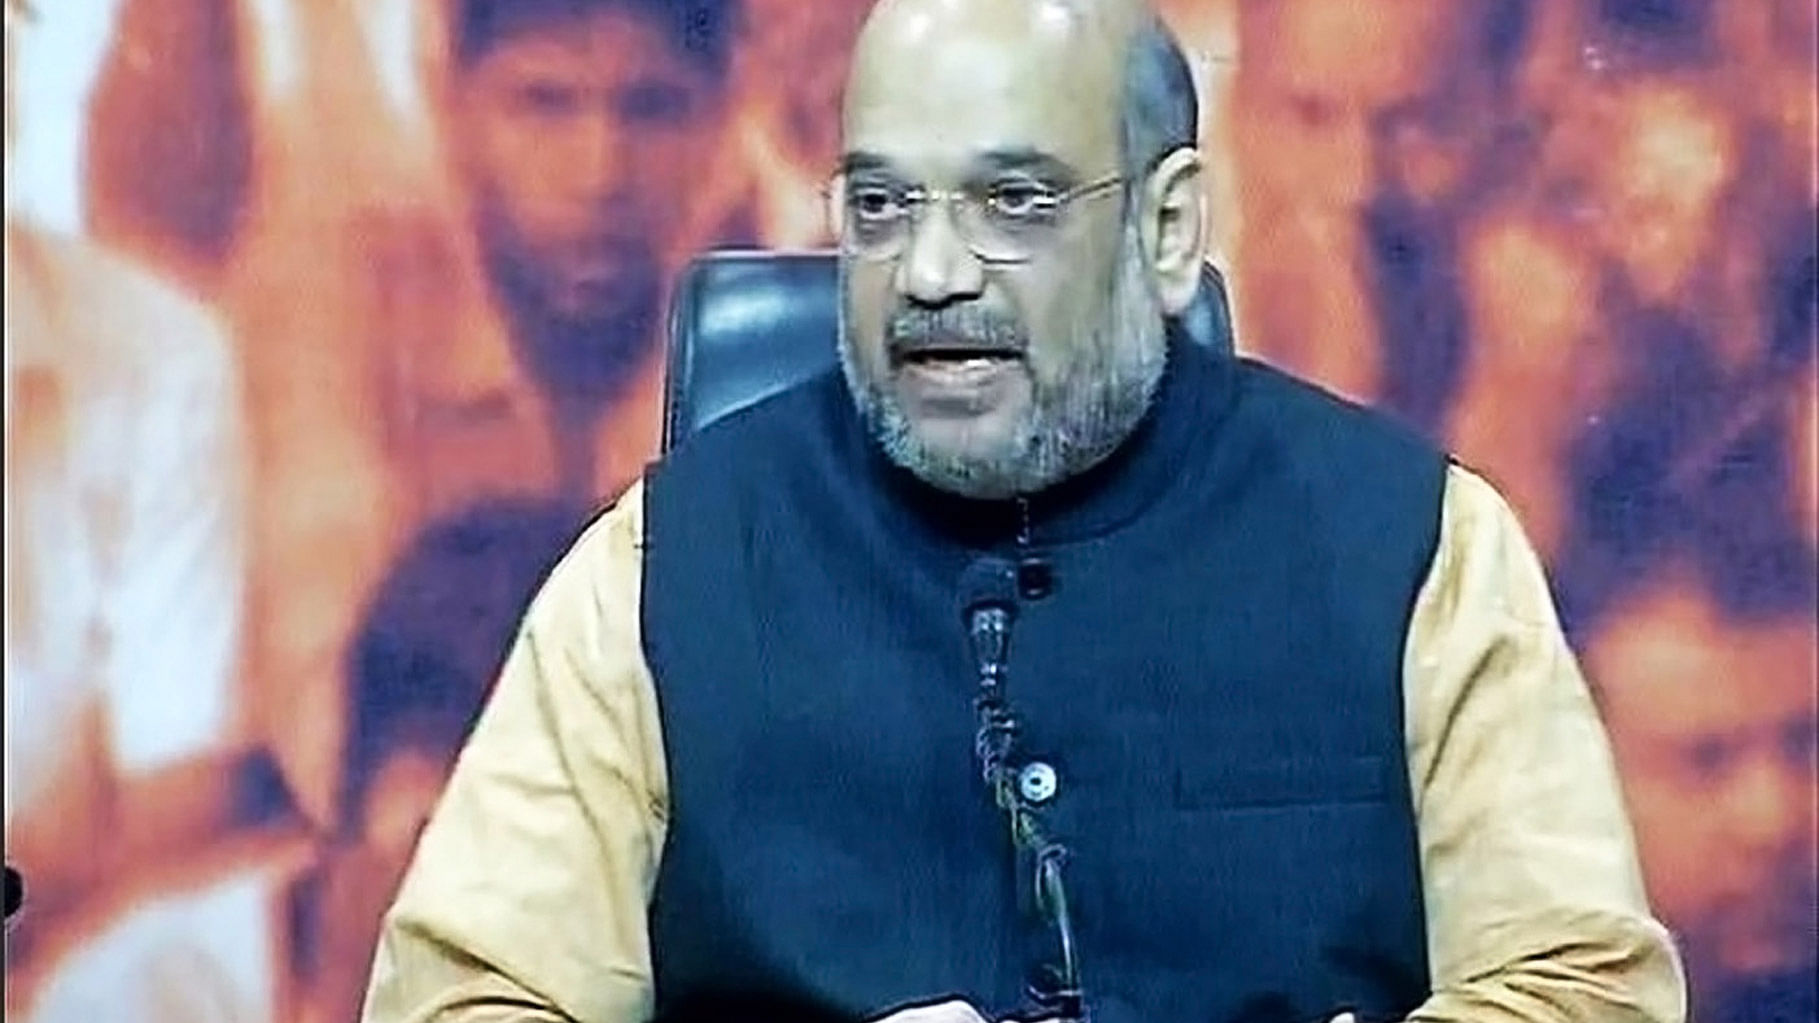 Amit Shah speaks at a press conference after the results of the Assembly elections were announced.(Photo Courtesy: <a href="https://twitter.com/ANI_news?ref_src=twsrc%5Egoogle%7Ctwcamp%5Eserp%7Ctwgr%5Eauthor">Twitter/@ANI_news</a>)